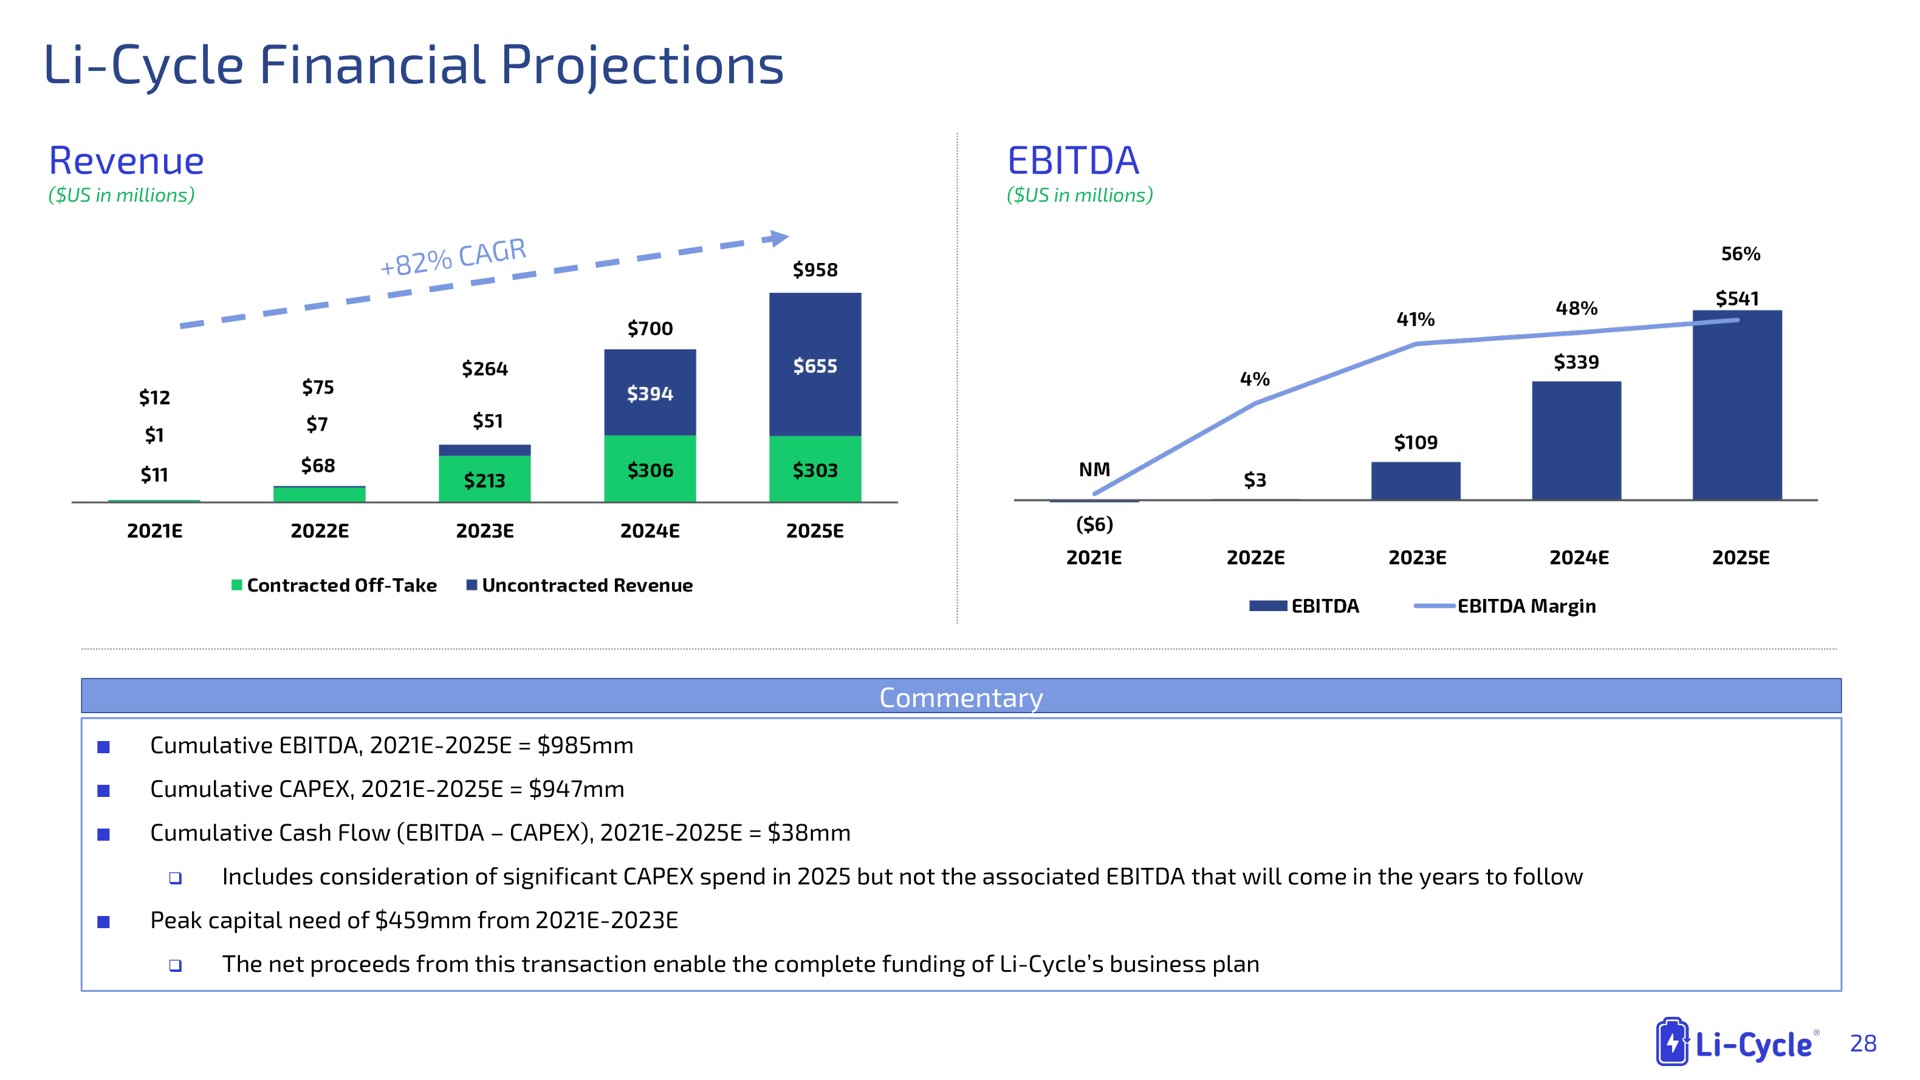 cycle financial projections revenue | Li-Cycle